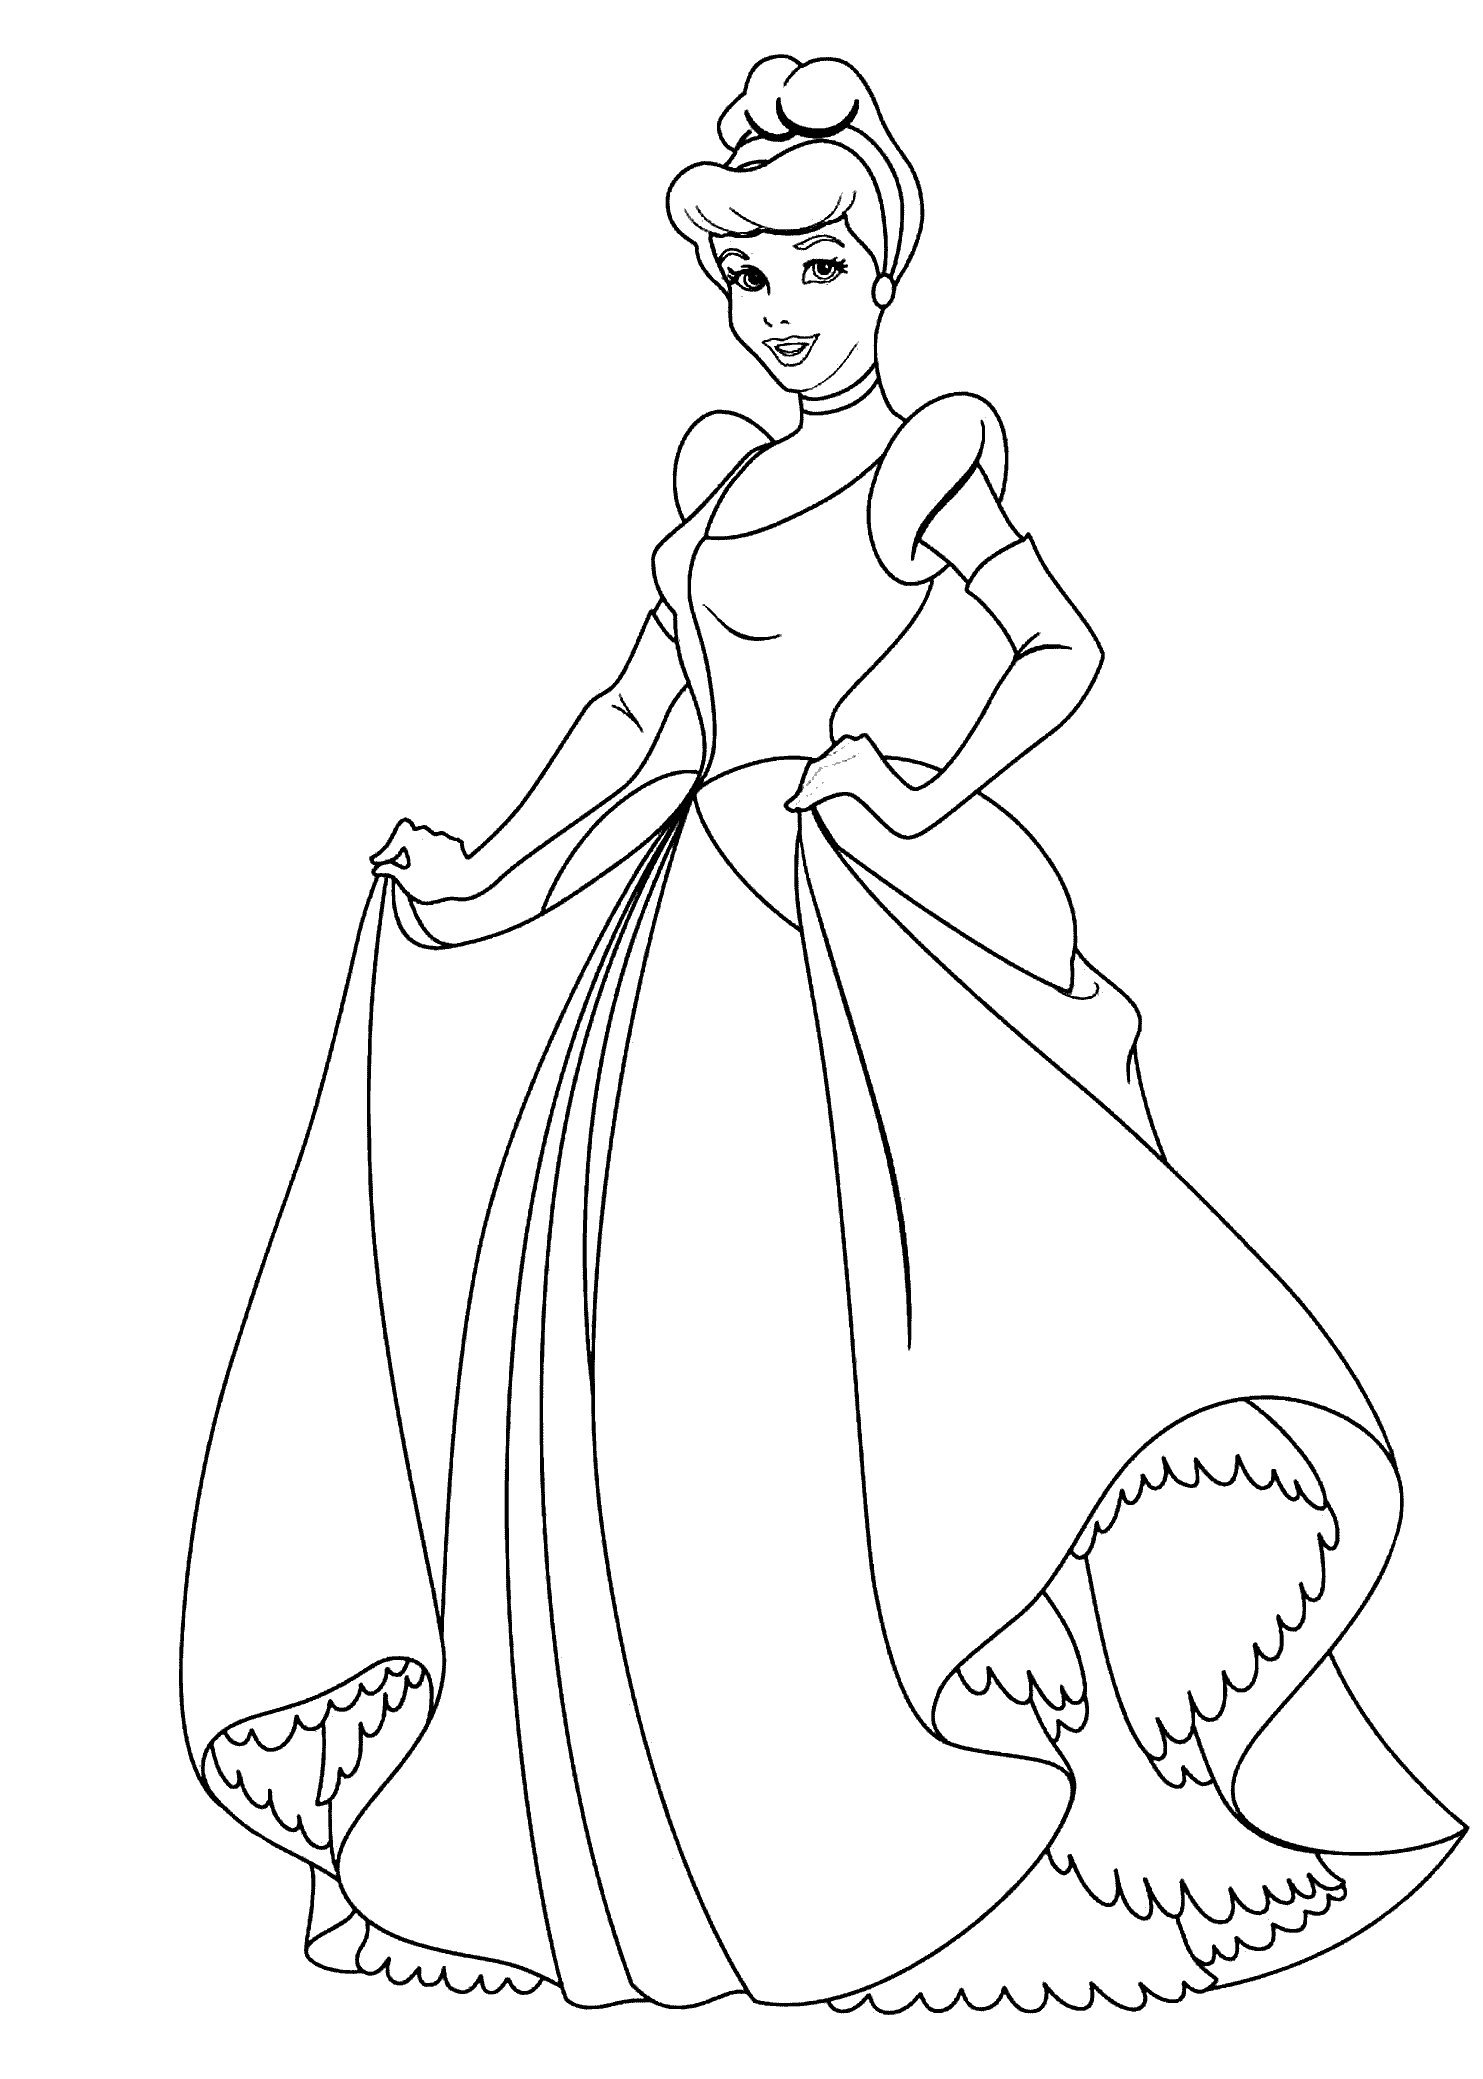 cinderella colouring pages free cinderella princess coloring pages for kids printable cinderella pages colouring free 